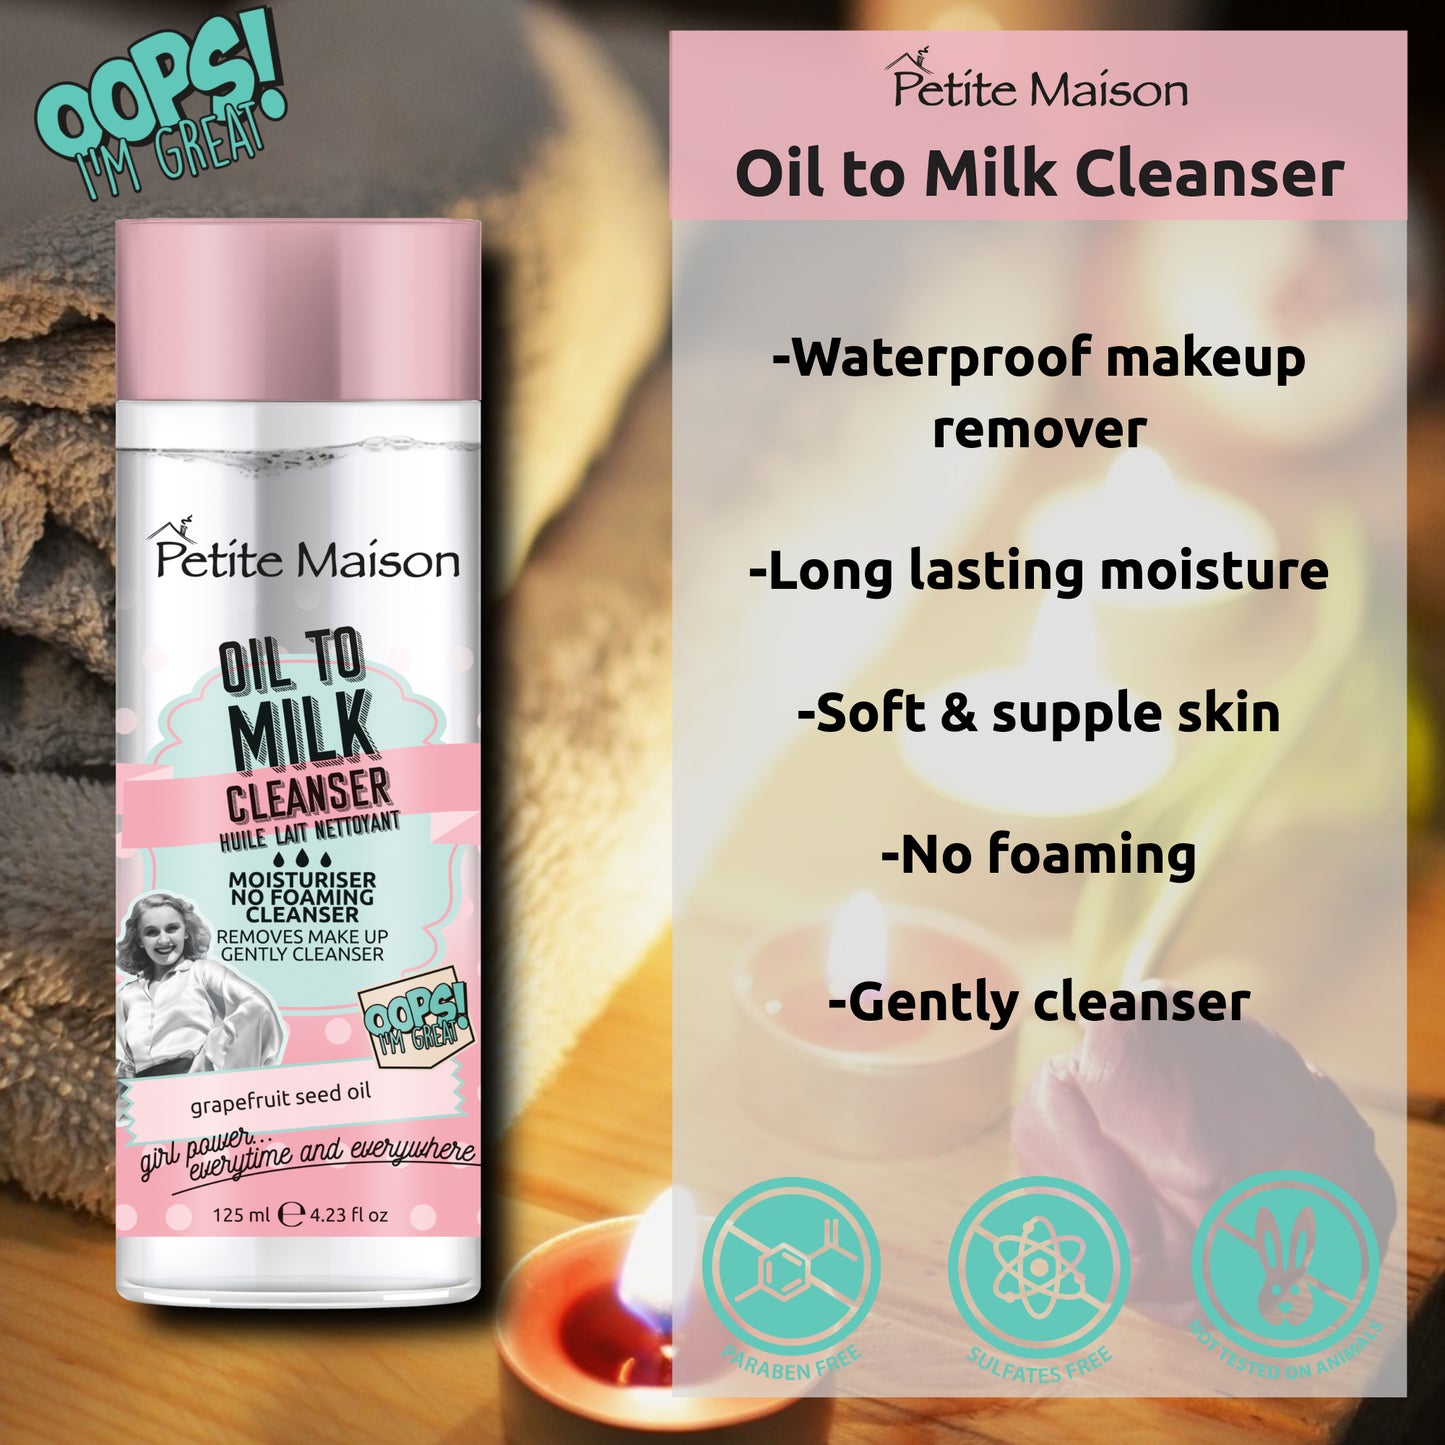 Petite Maison Oil to Milk Makeup Cleansers